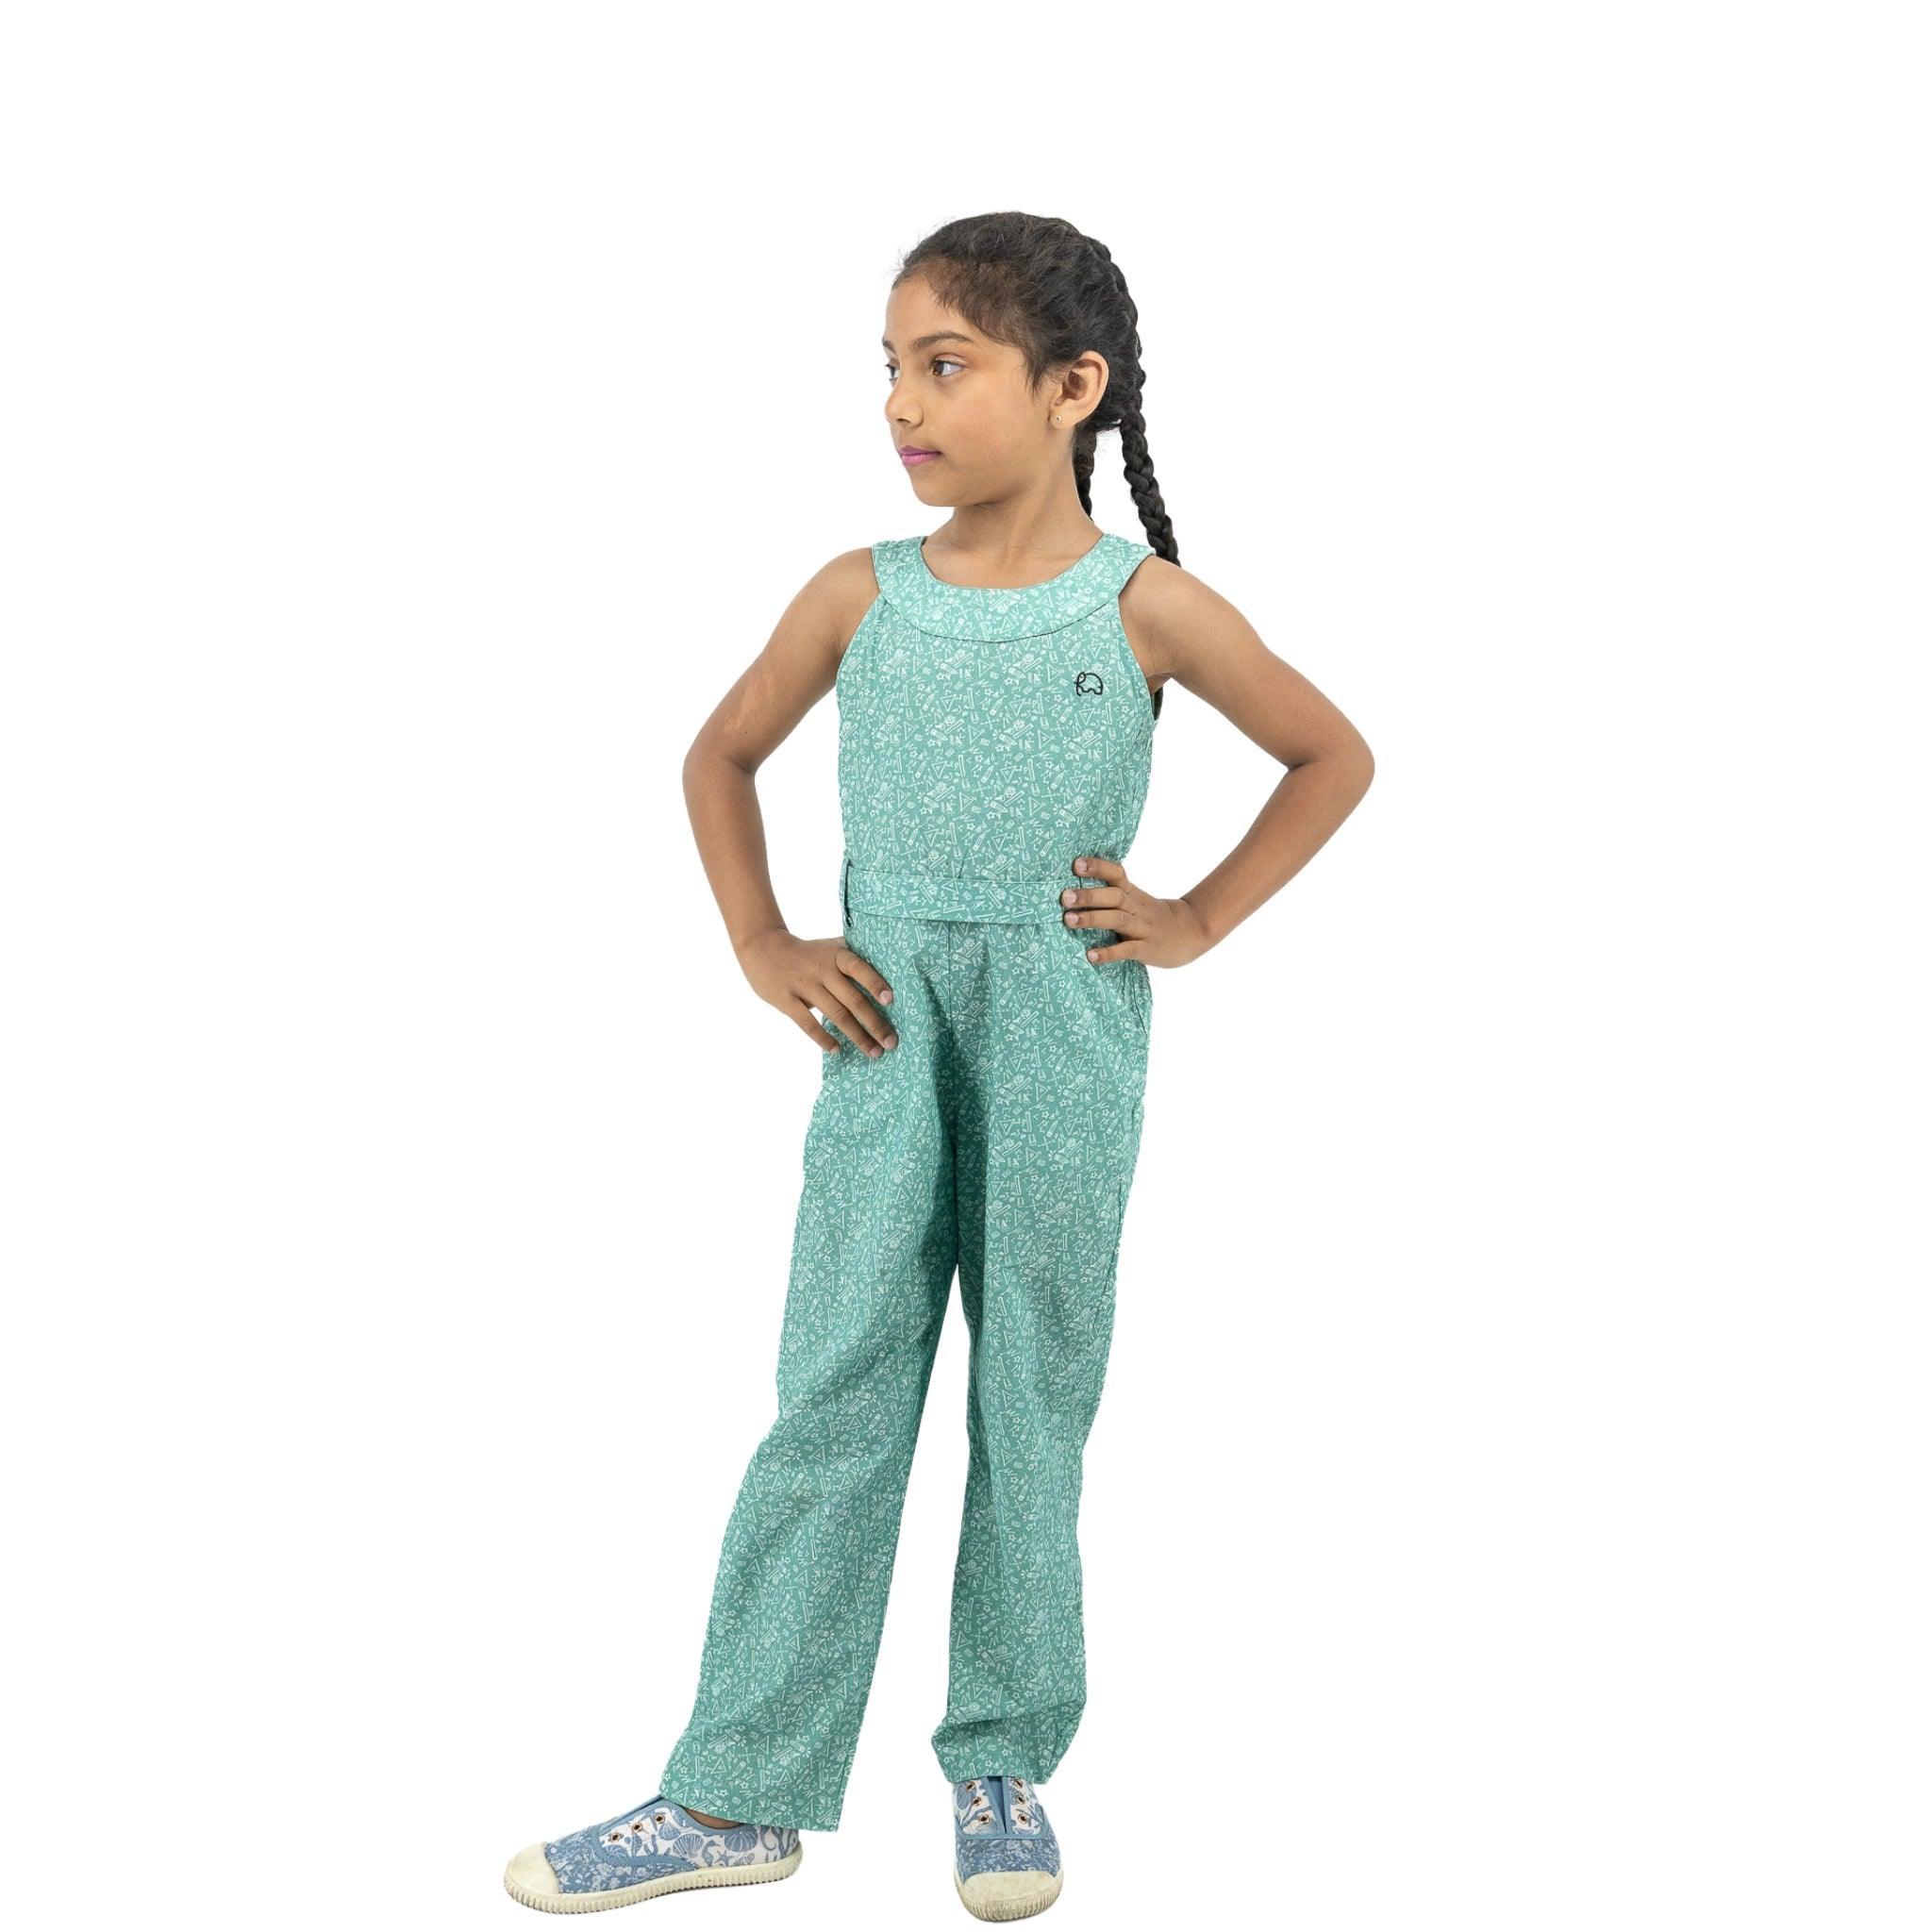 A young girl stands confidently, hands on hips, wearing a Karee Smoke Green Cotton Jumpsuit for Girls and patterned sneakers. She has long braided hair.